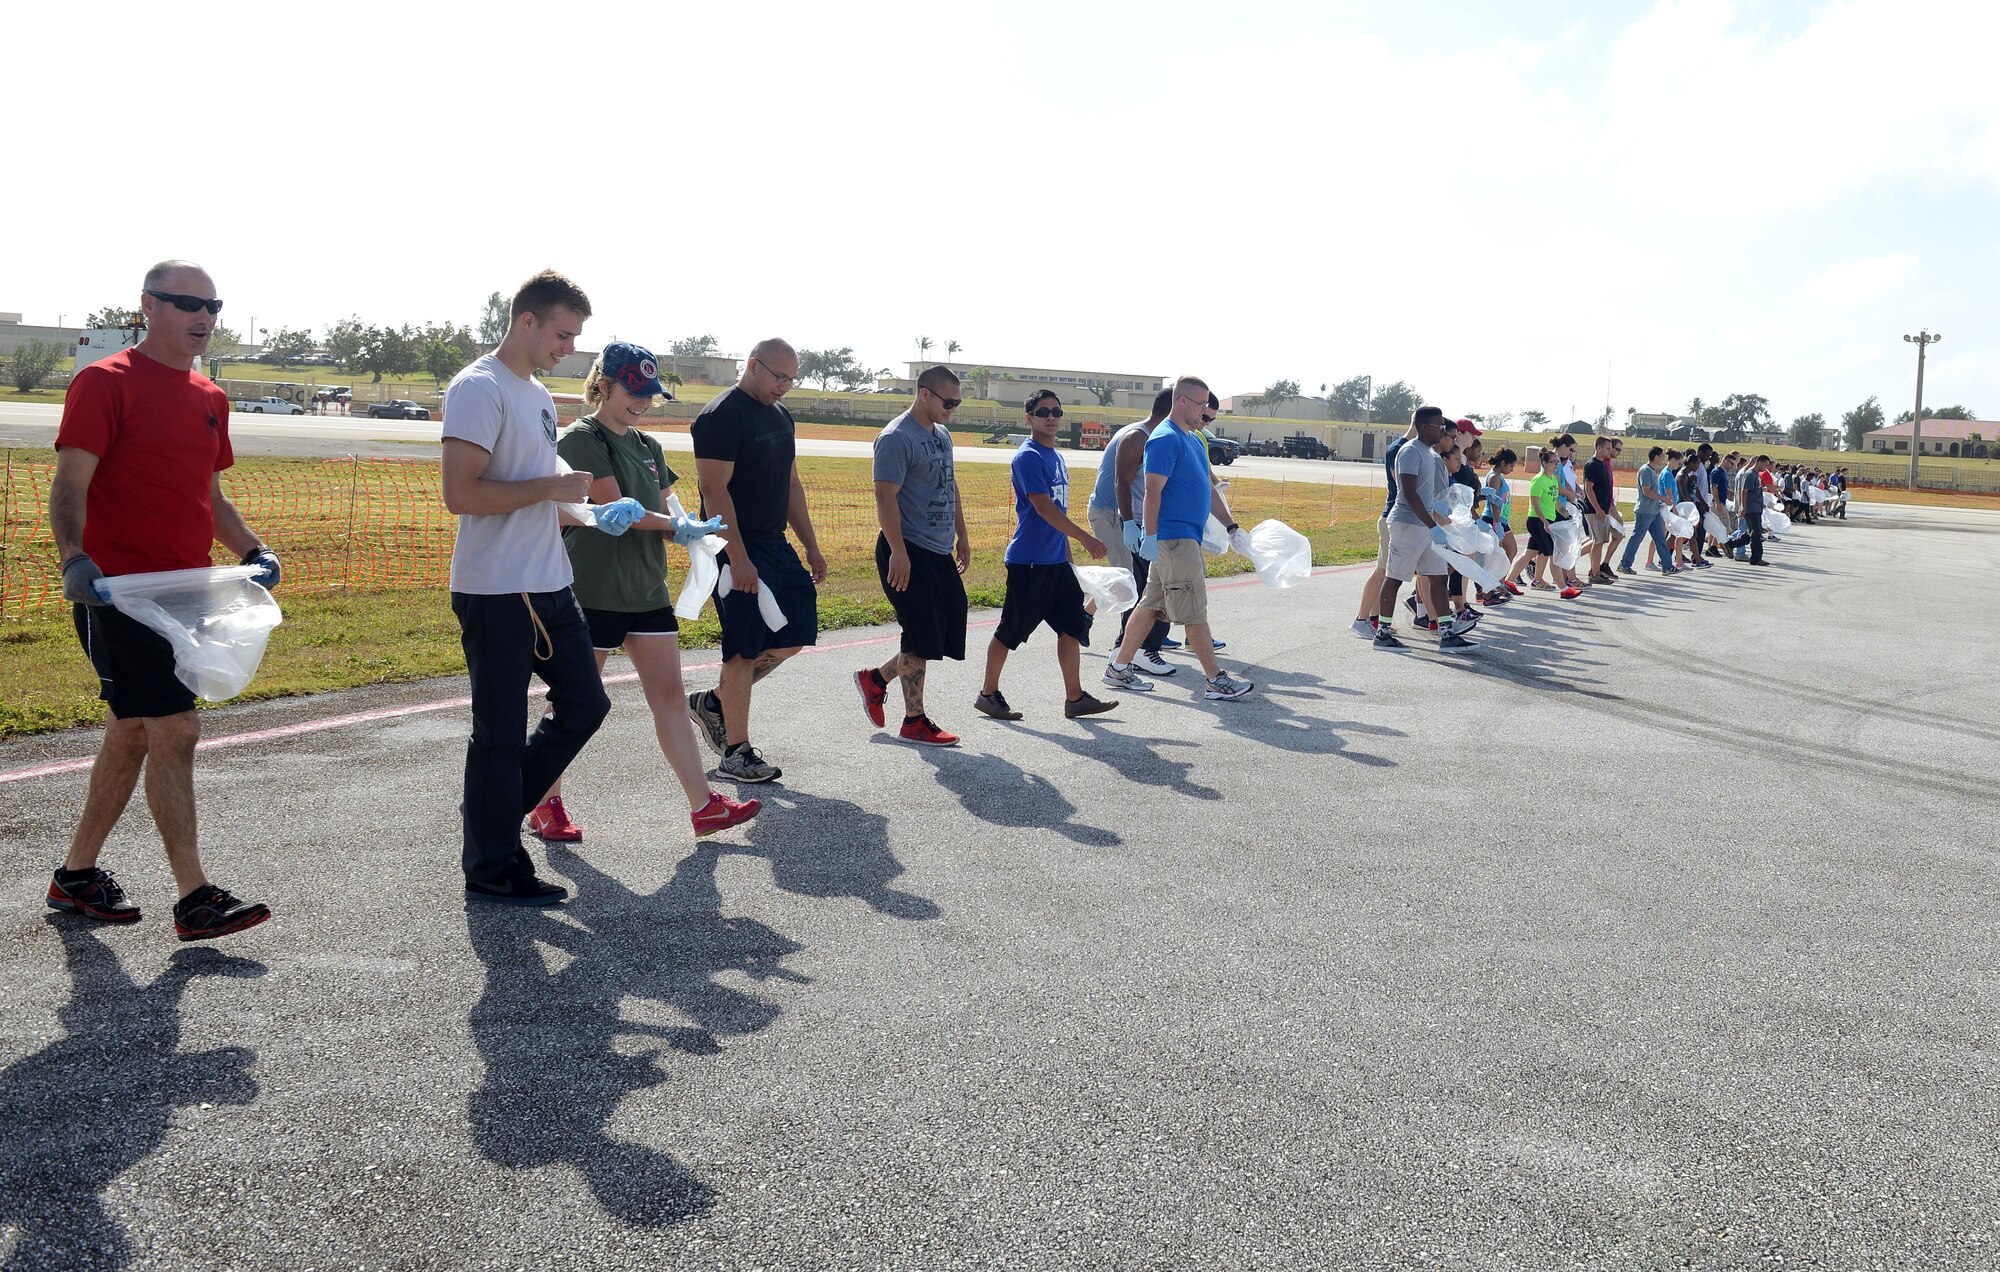 Airmen conducted a foreign object damage walk Feb. 21, 2016, at Andersen Air Force Base, Guam. The FOD walk was conducted after the 2016 Pacific Air Partners Open House to ensure no debris was left on the flightline, which could affect aircraft engines. (U.S. Air Force photo/Airman 1st Class Arielle Vasquez)